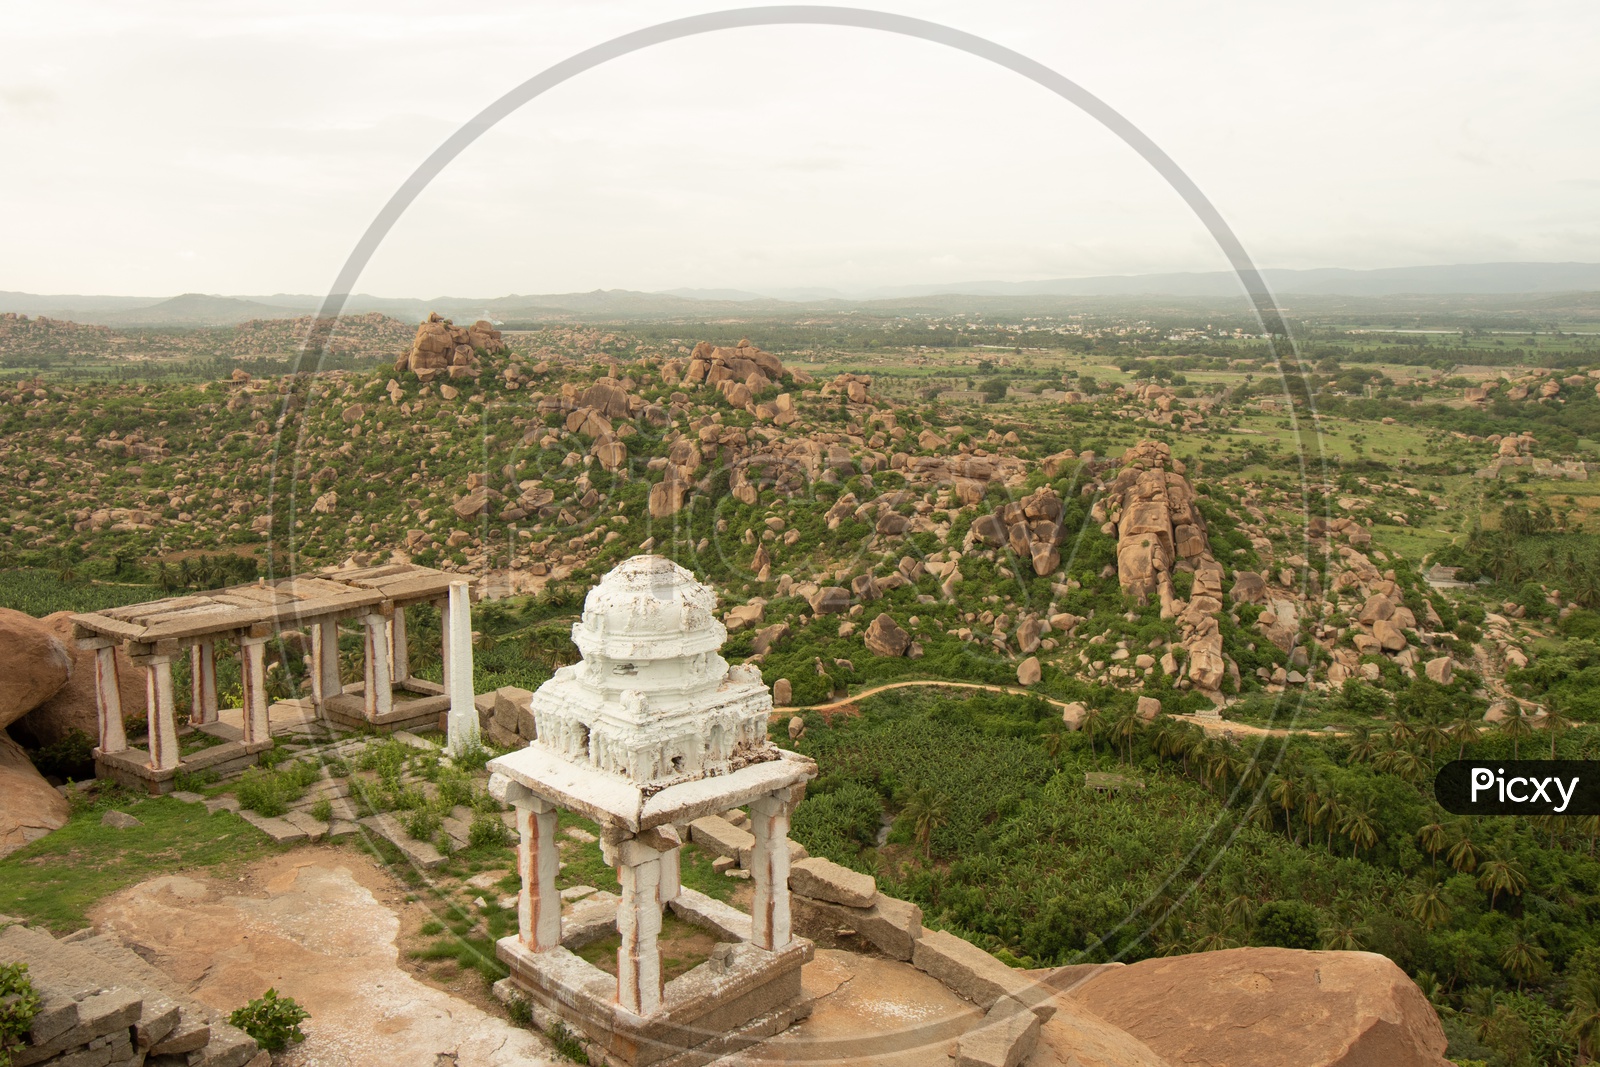 Over the top of a temple in hampi.